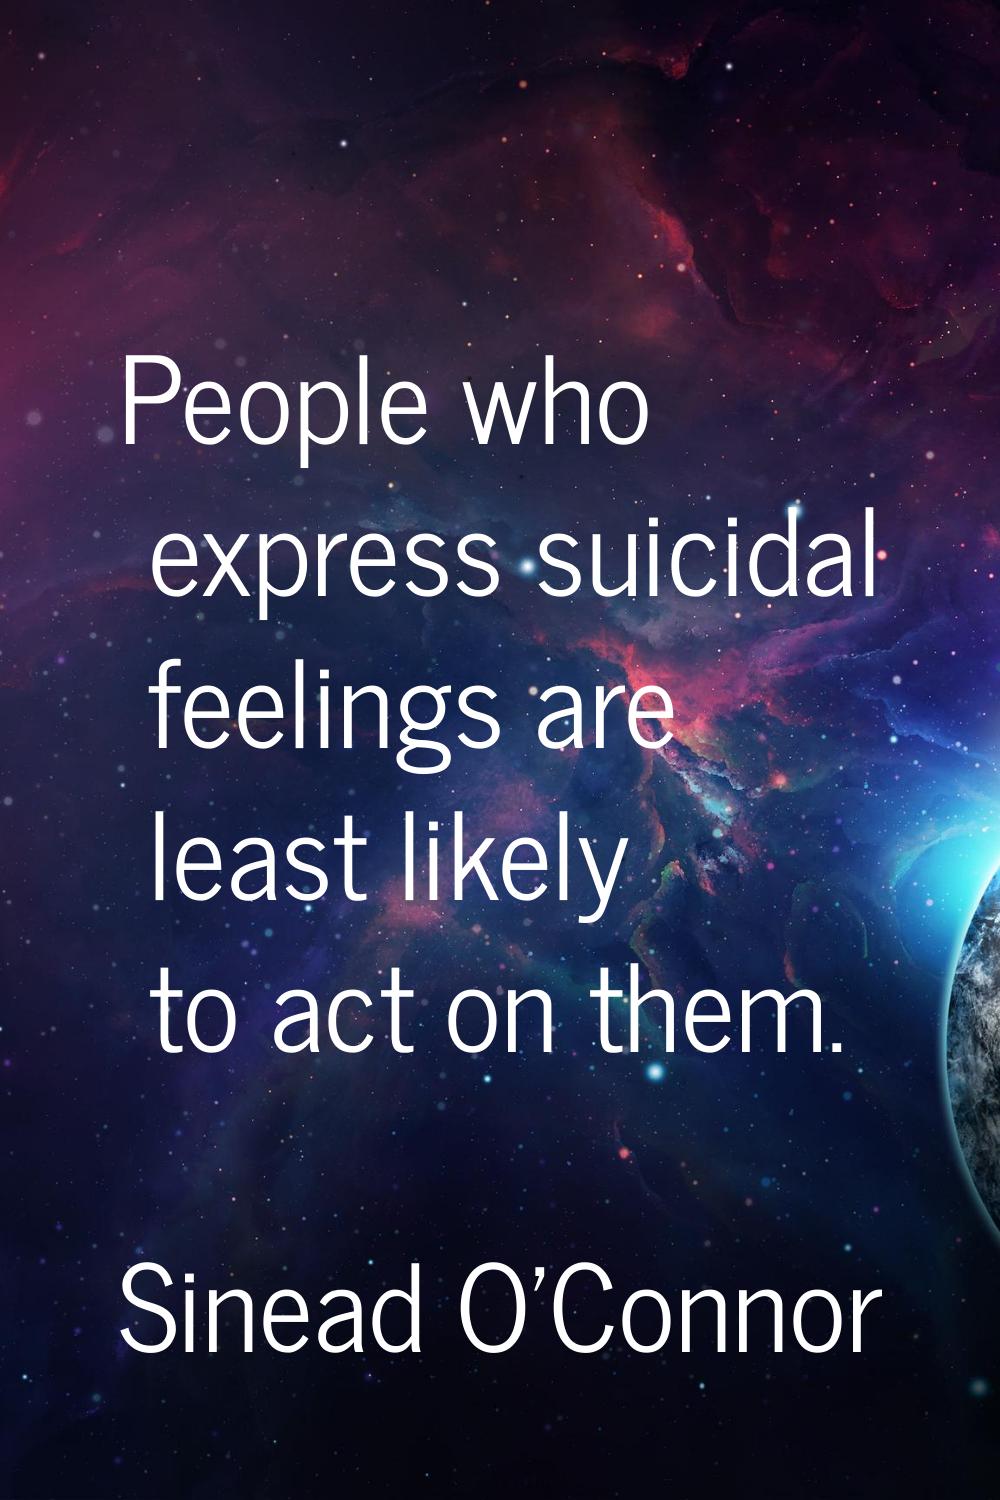 People who express suicidal feelings are least likely to act on them.